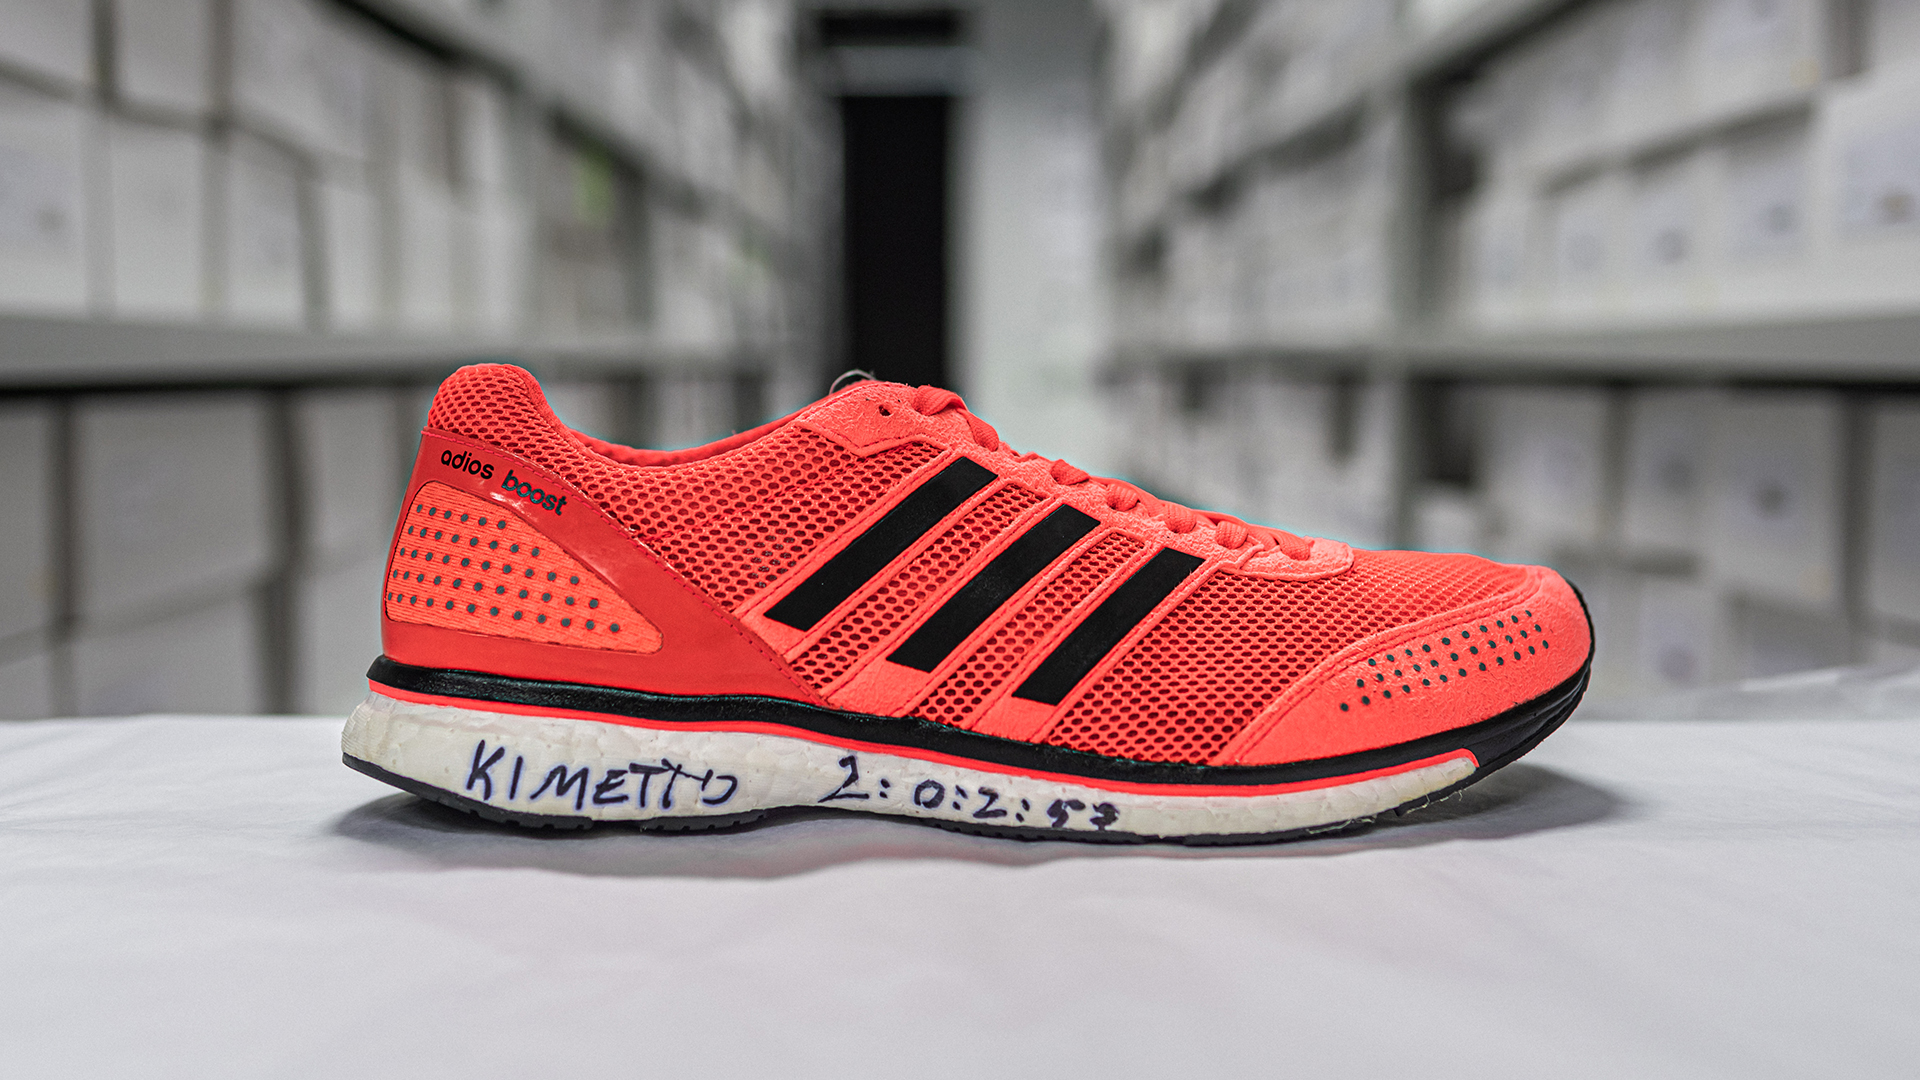 systematisch staart Kan niet lezen of schrijven adidas Running on Twitter: "With the adizero adios Boost 2.0 on his feet,  Dennis Kipruto Kimetto changed fast forever at the 2014 Berlin Marathon.  Crossing the finish line in a world record